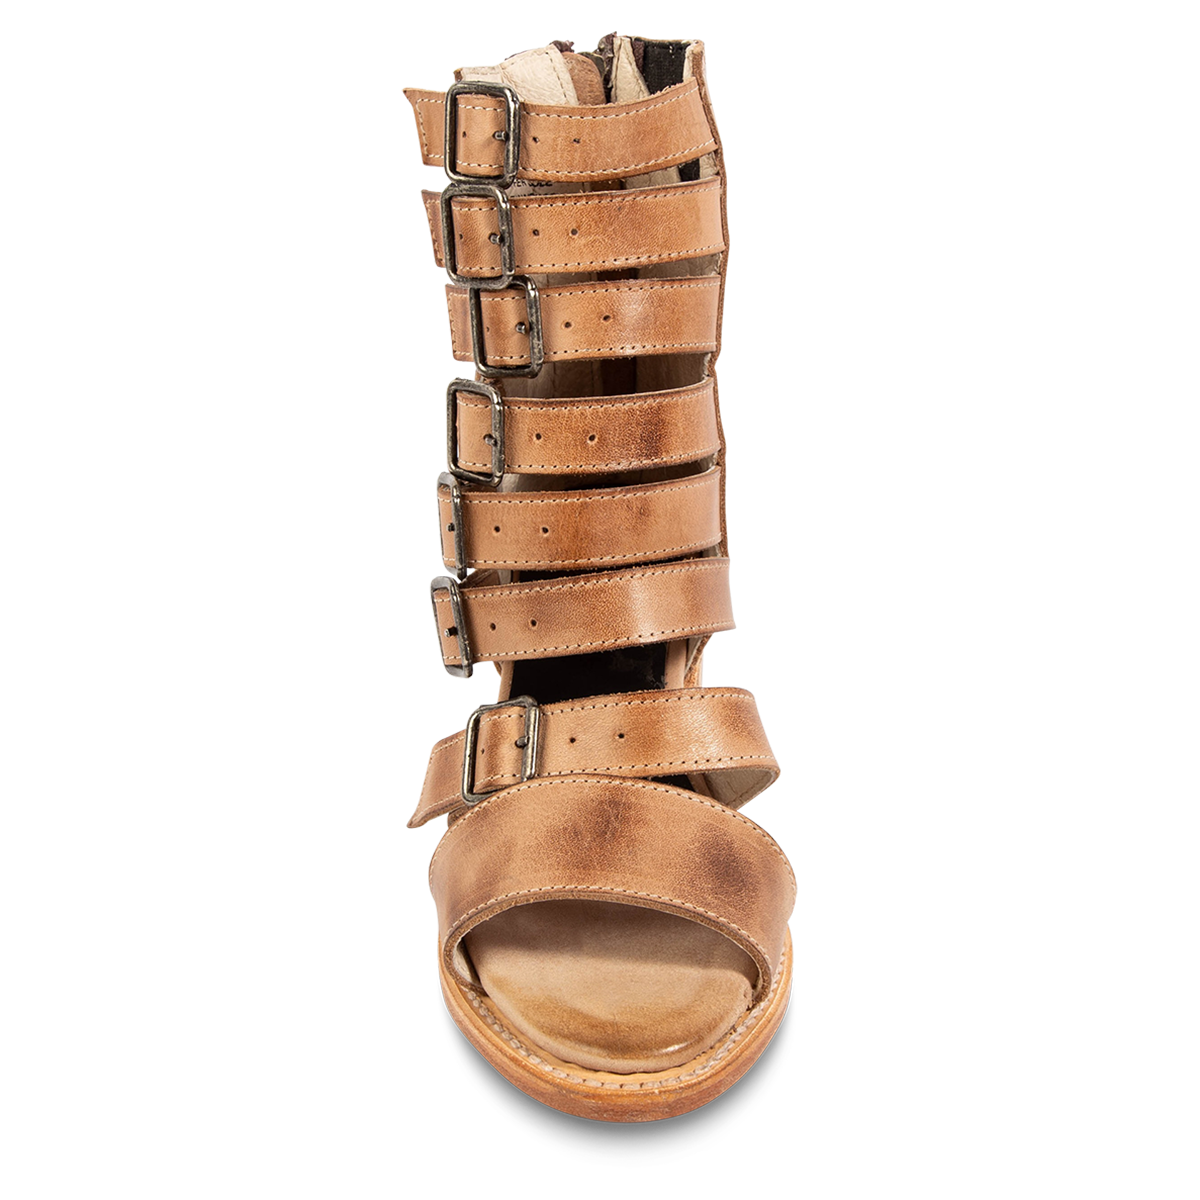 Front view showing FREEBIRD women's Country natural leather sandal with an open toe and adjustable leather straps